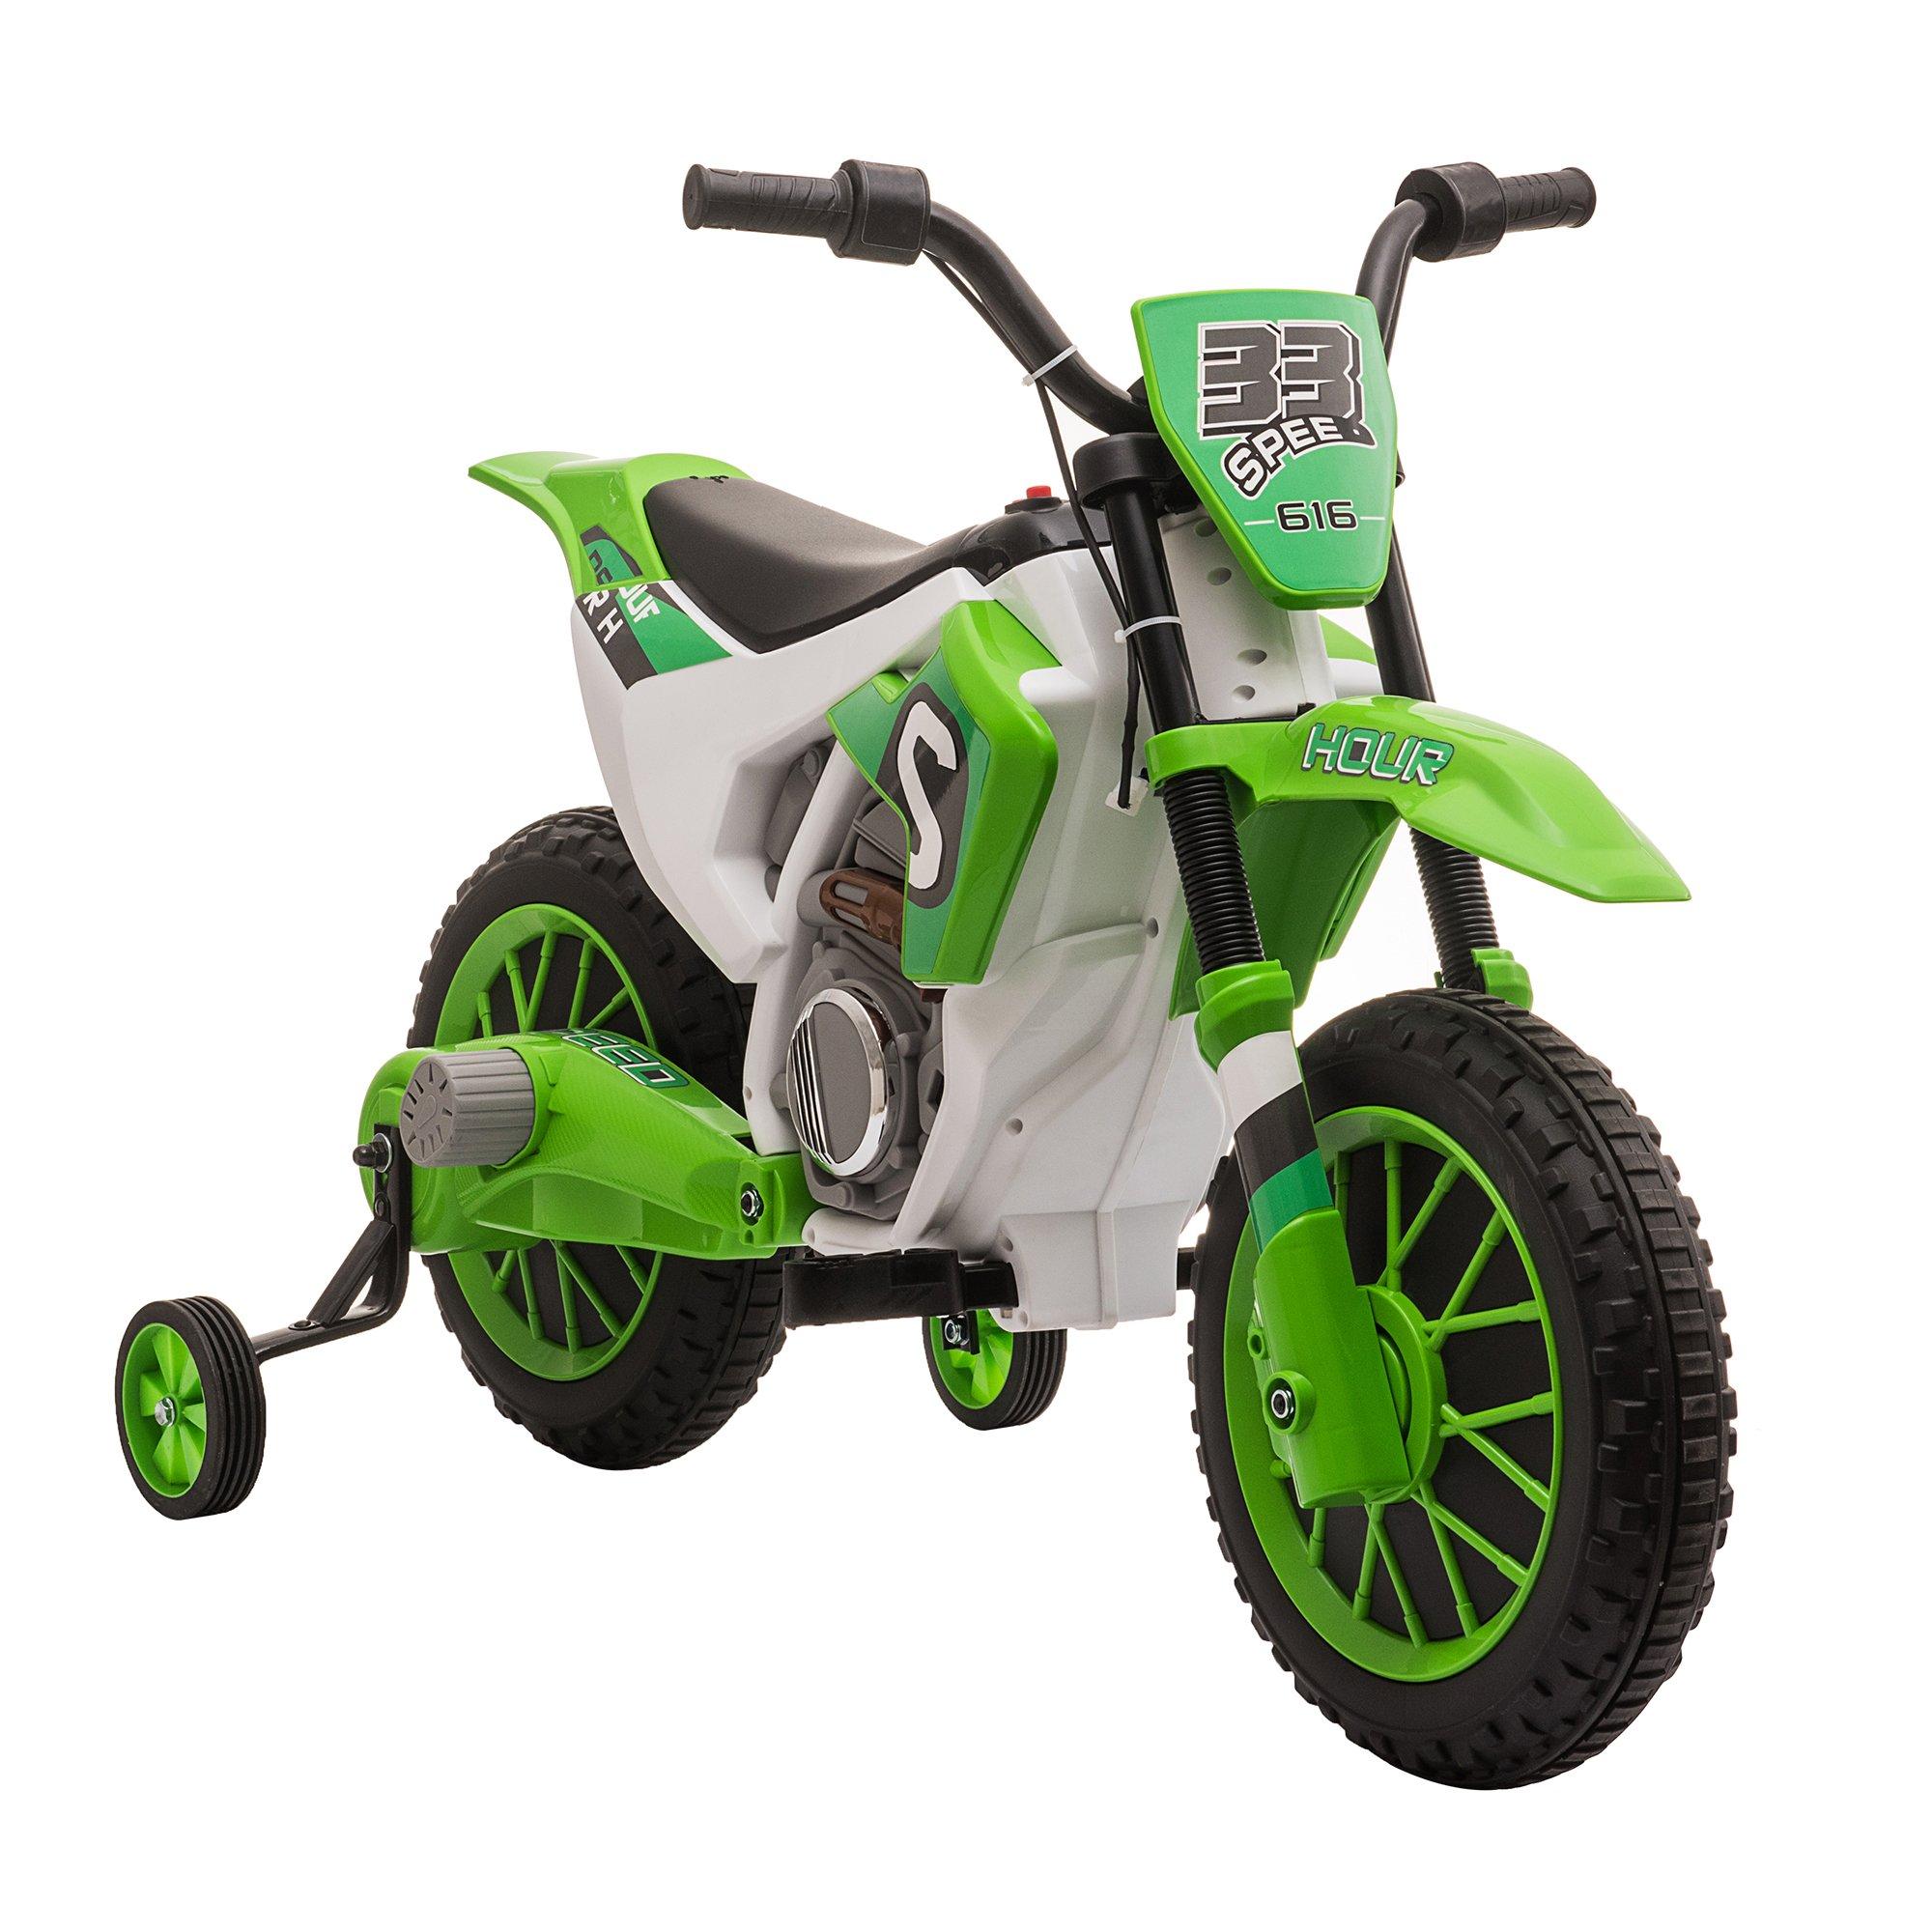 Kids Motorbike Electric Ride-On Toy Training Wheels, for 3-5 Years